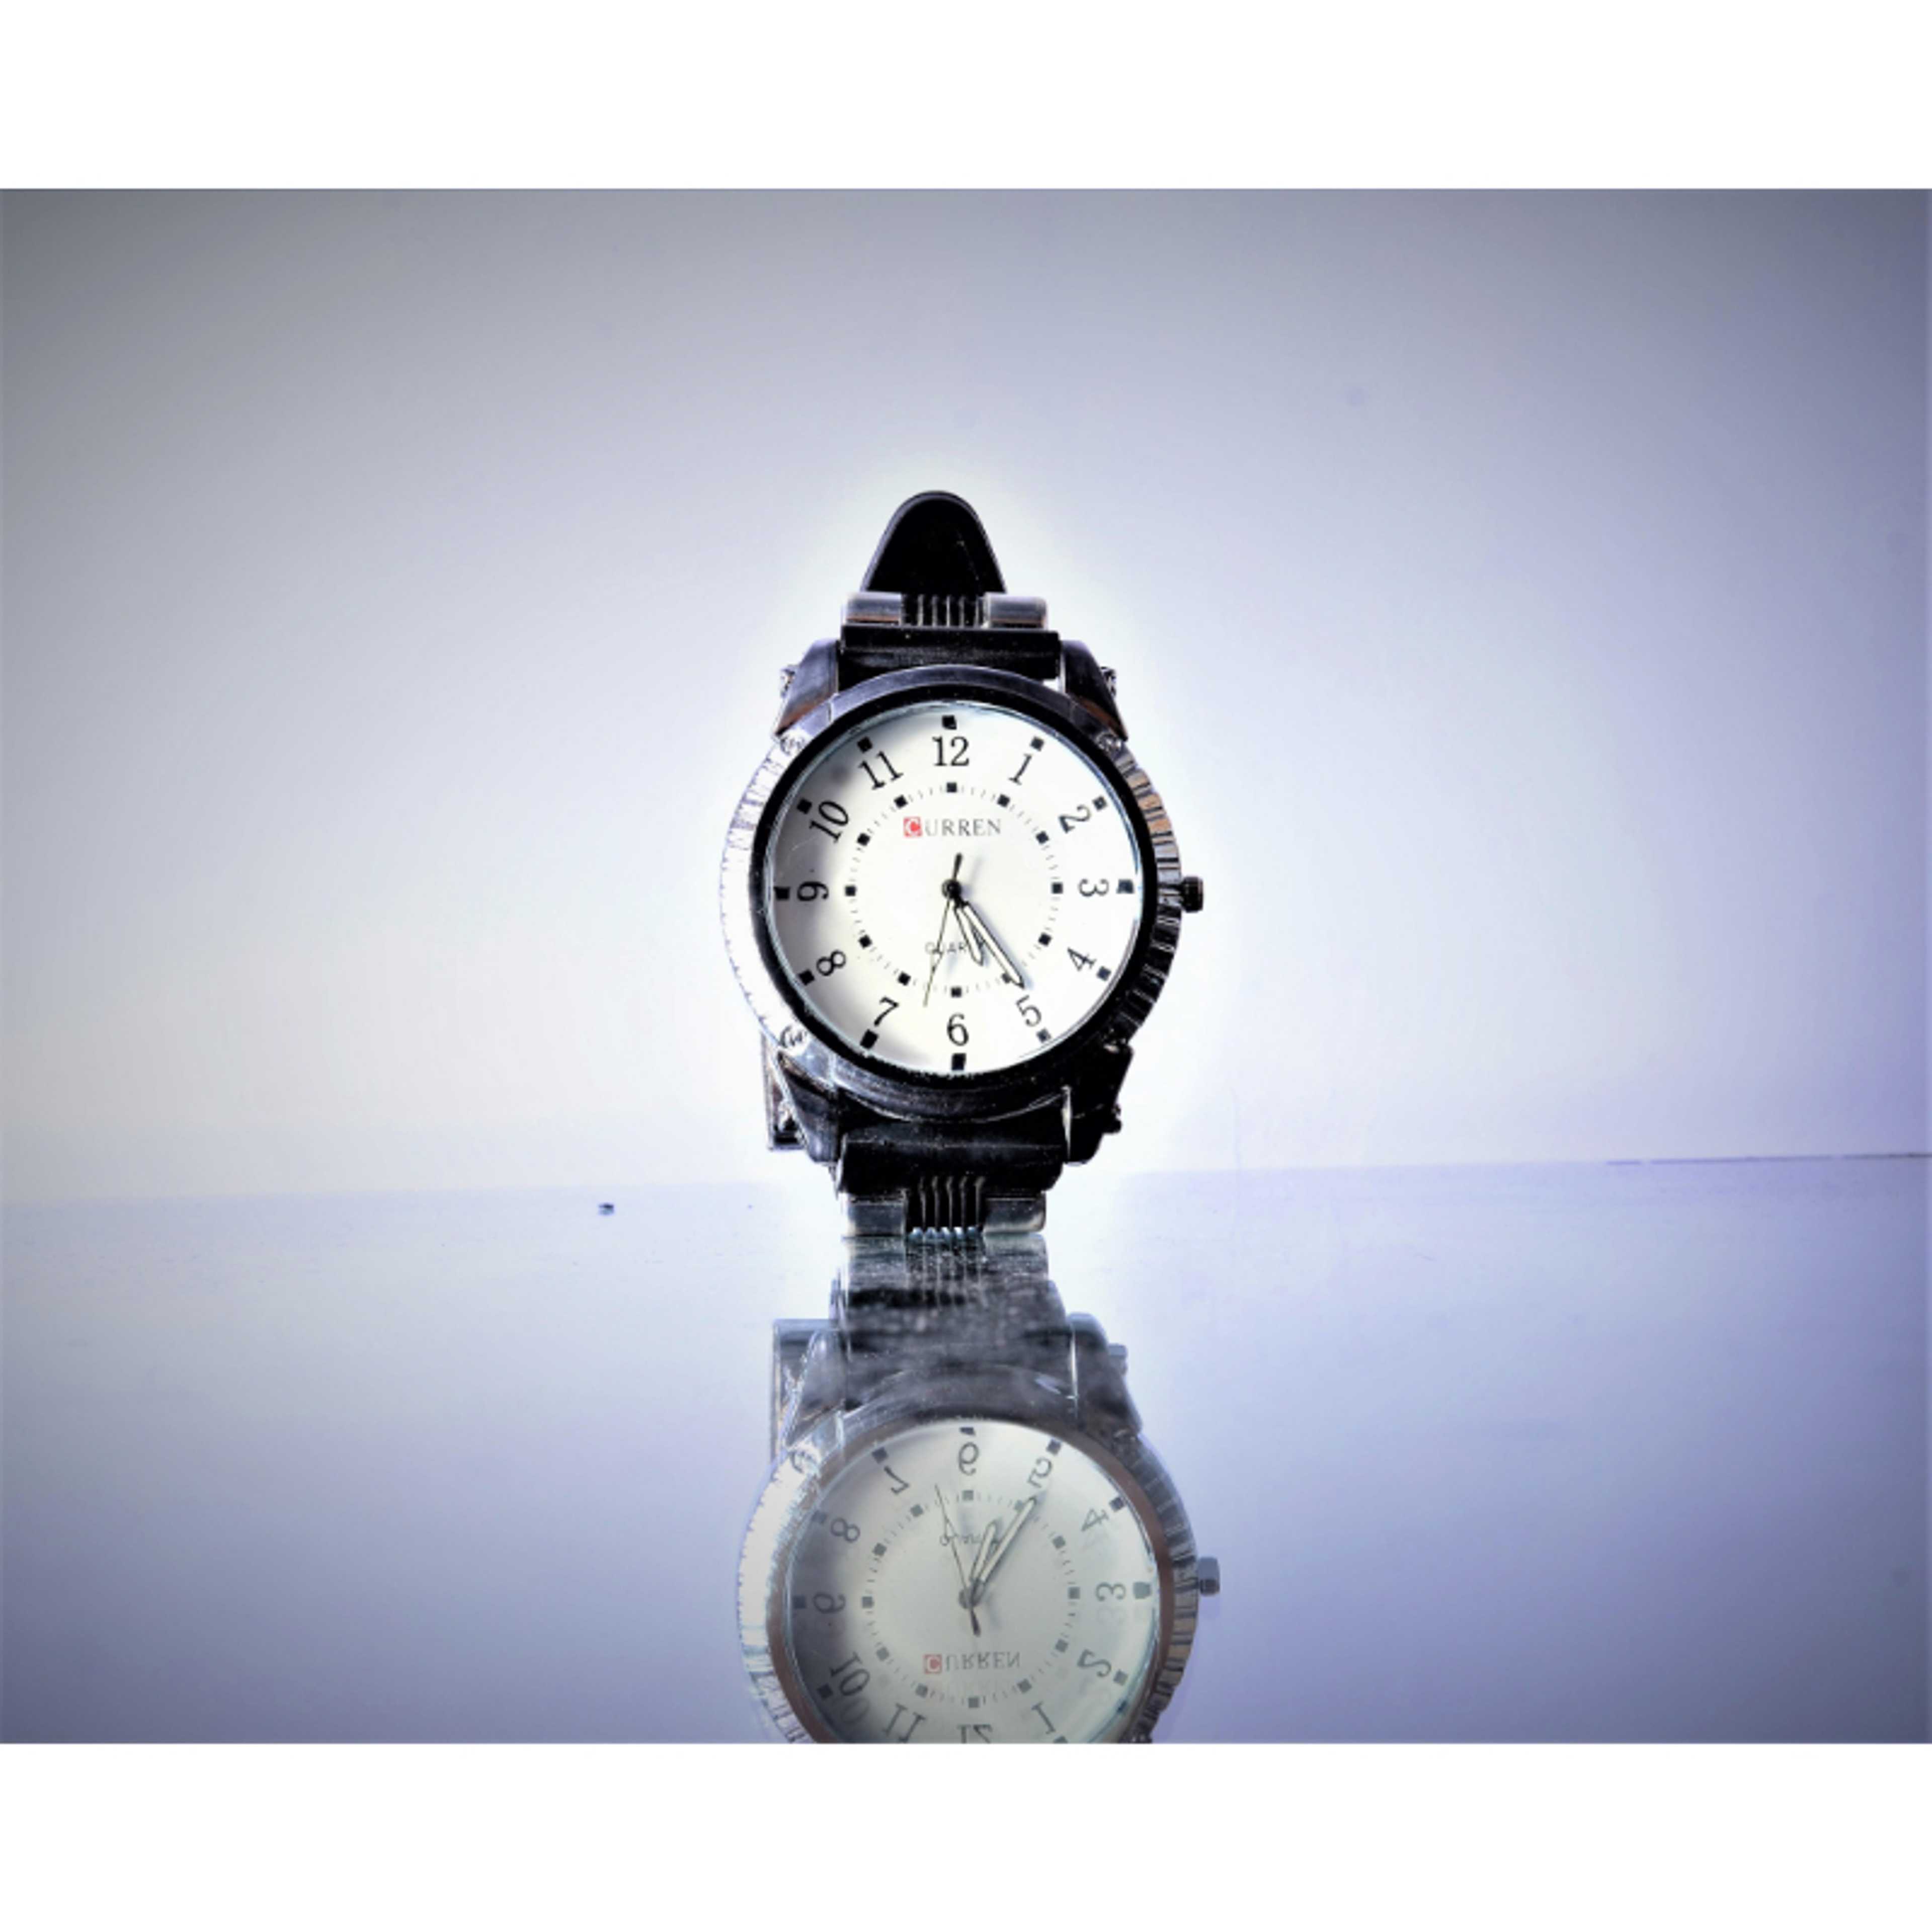 Black Watch for Men Formal Watch Imported Quality Stylish Watch